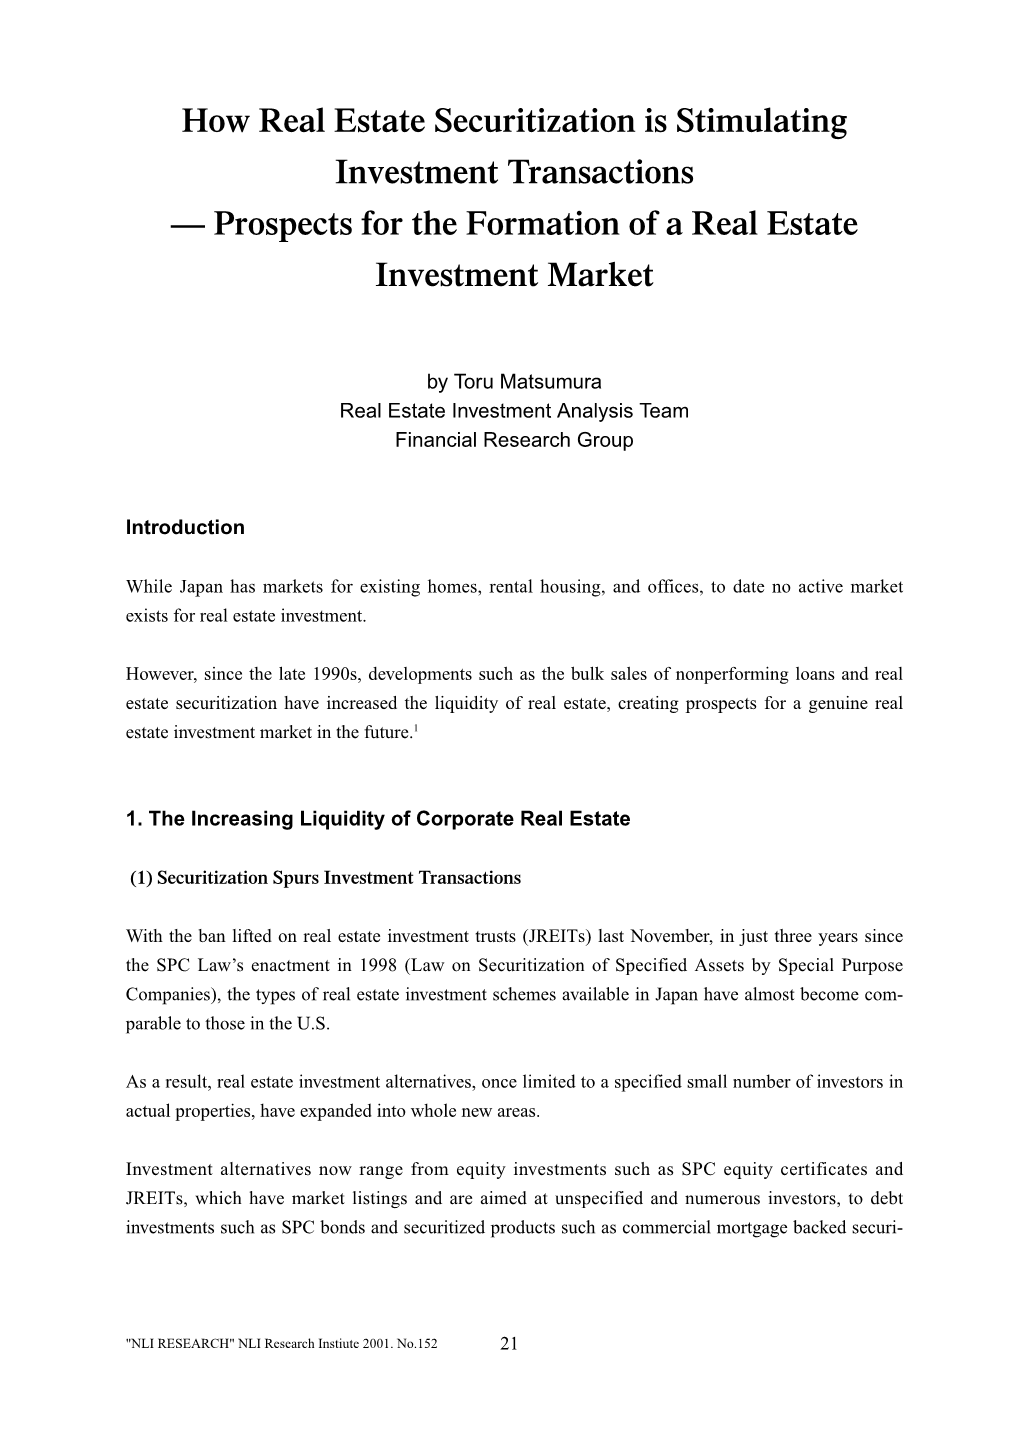 How Real Estate Securitization Is Stimulating Investment Transactions — Prospects for the Formation of a Real Estate Investment Market